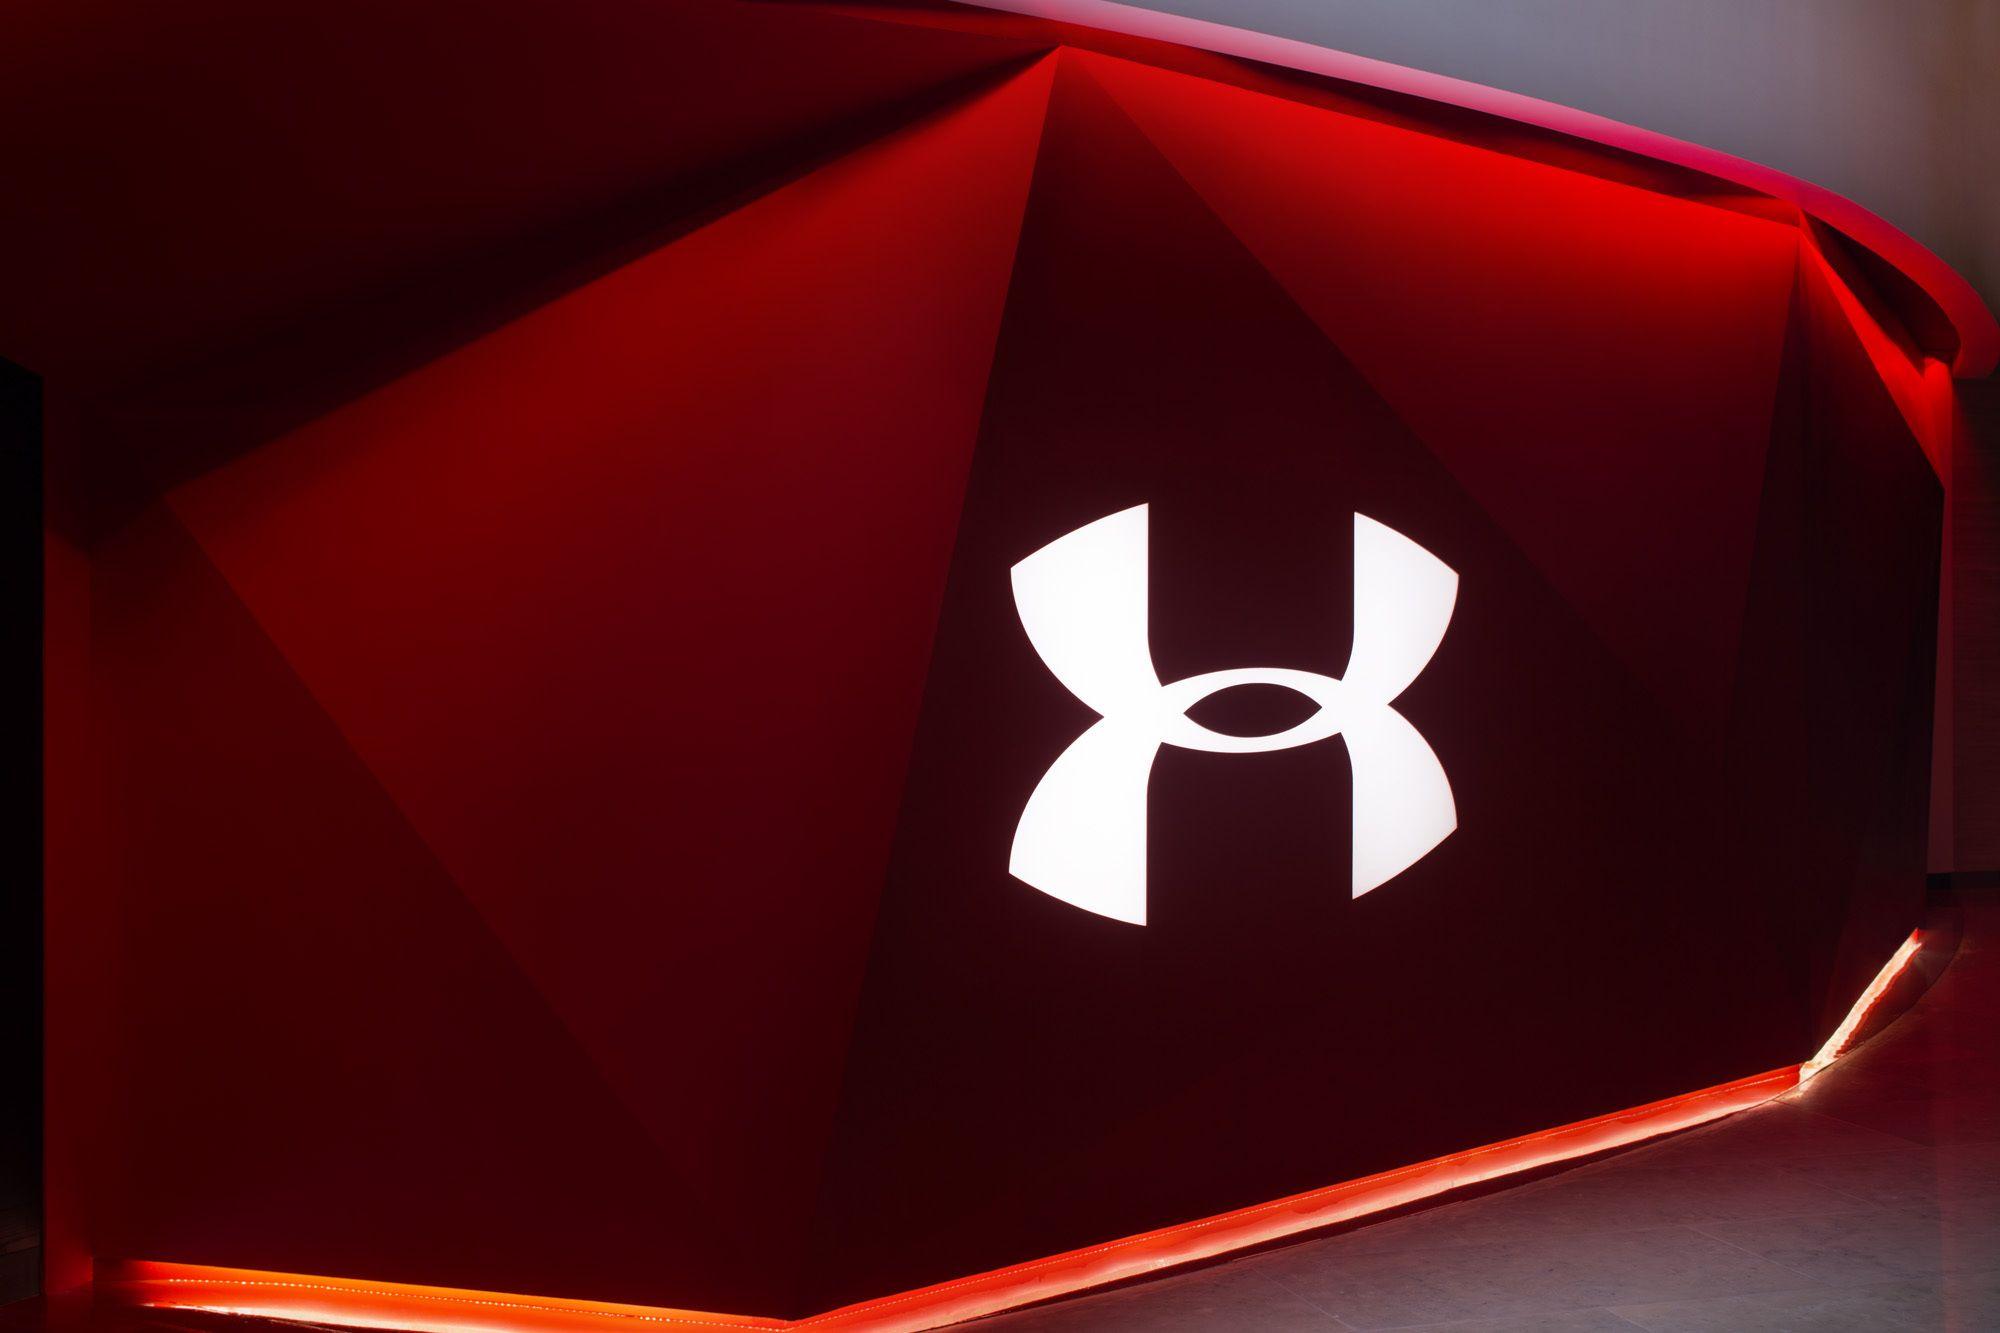 Awesome Under Armour Logo - Under Armour Wallpaper. Under Armour